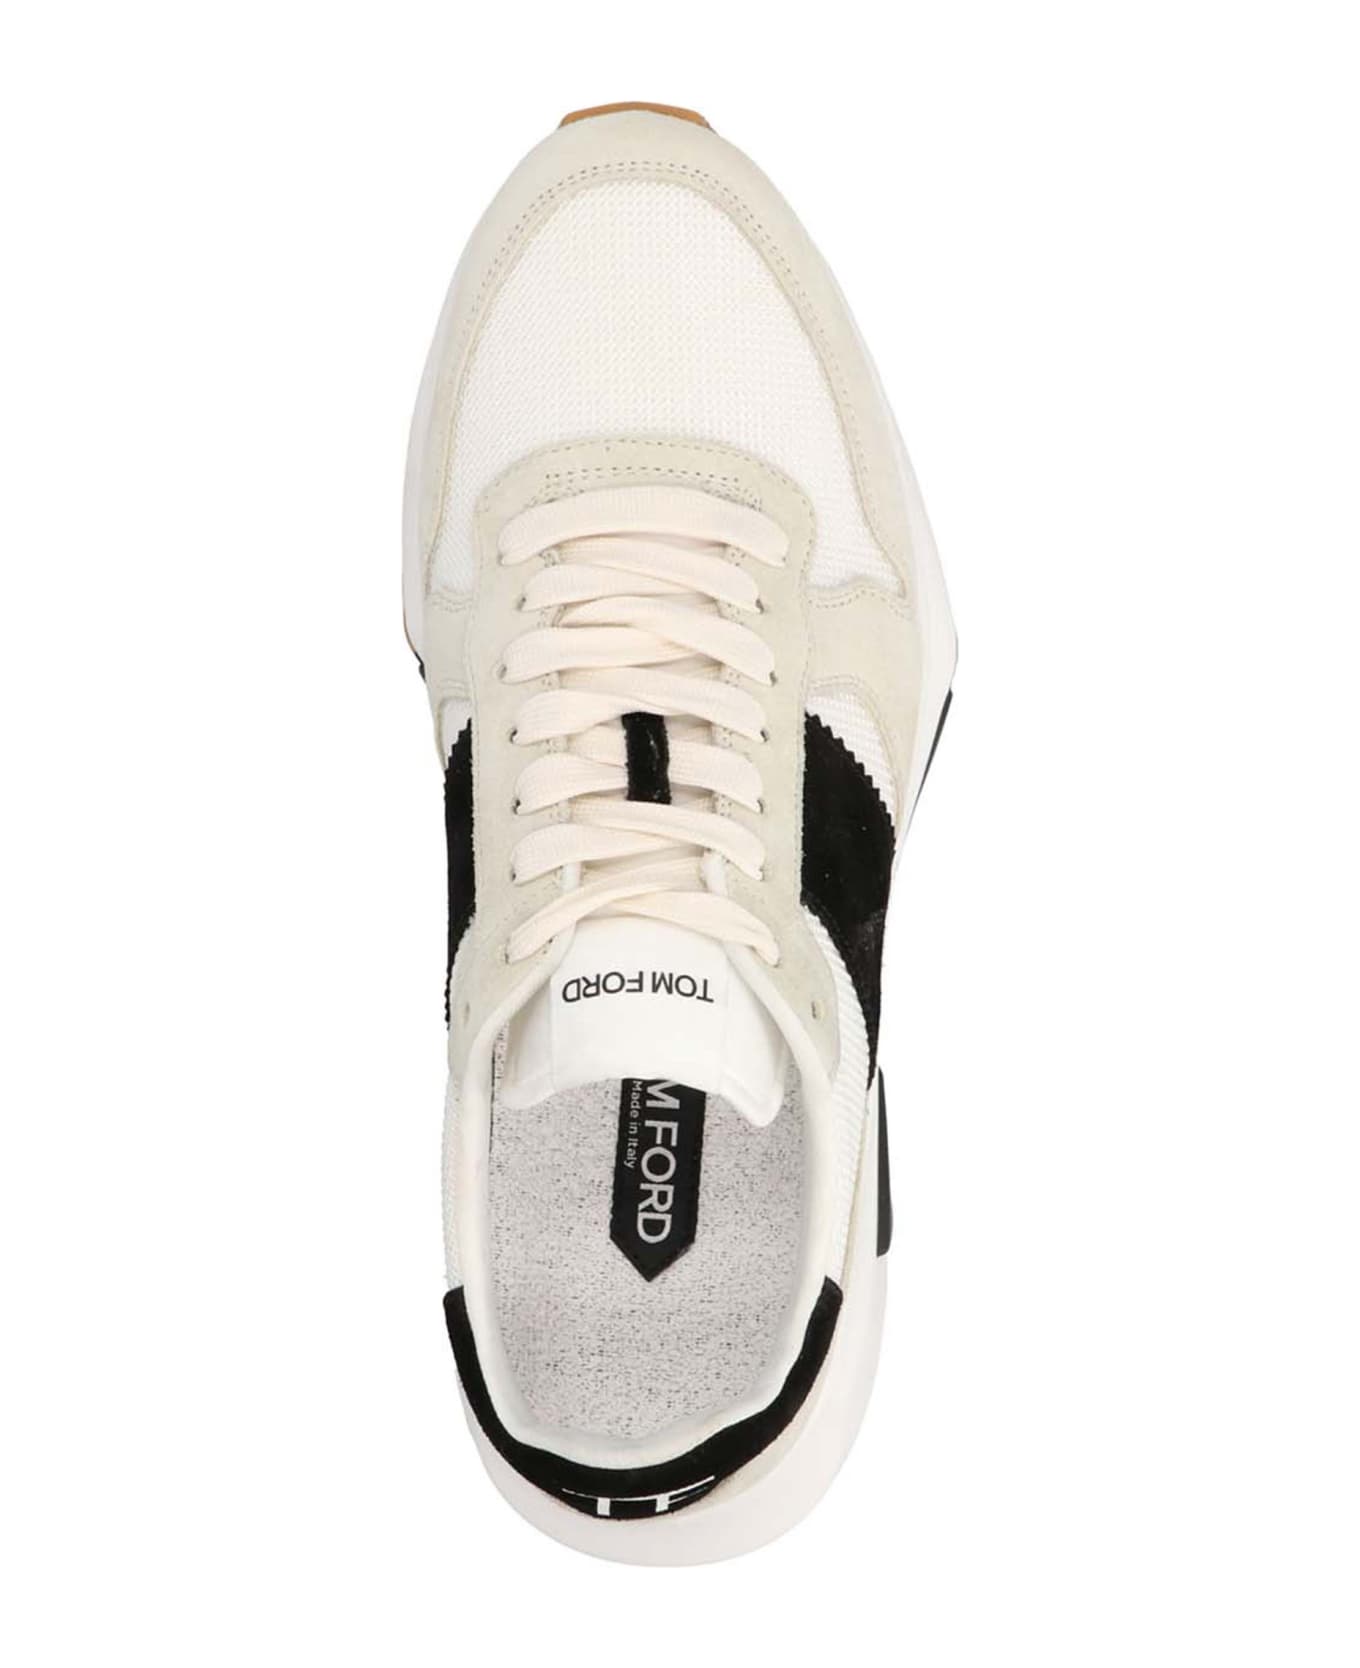 Tom Ford Logo Suede Sneakers - Multicolor